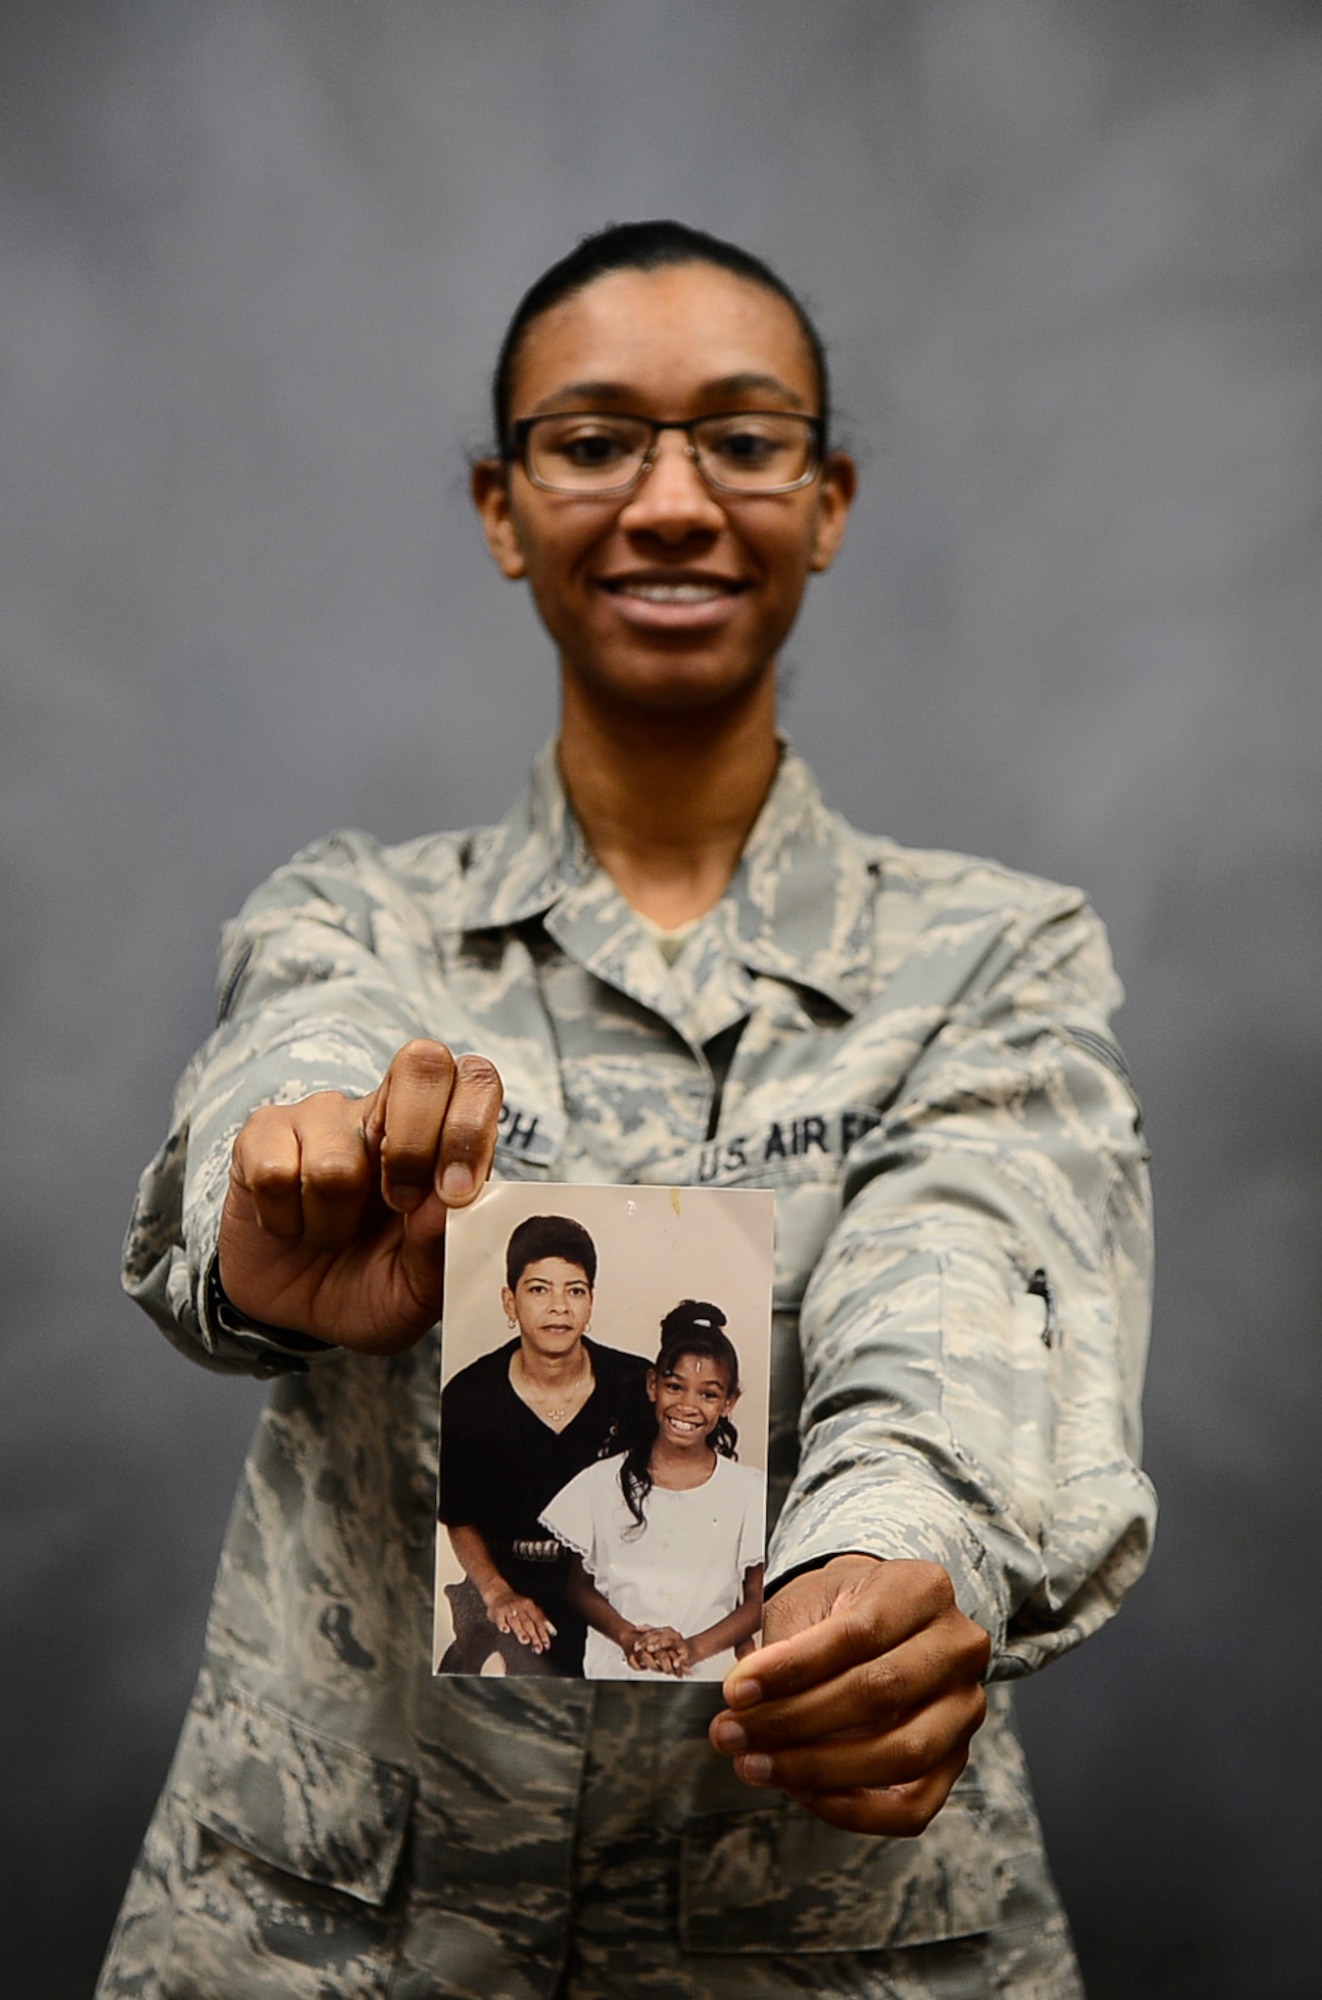 Senior Airmen Jenay Randolph, a photojournalist assigned to the 6th Air Mobility Wing Public Affairs office, holds out a photo of her and her mother at MacDill Air Force Base, Fla., Aug. 22, 2016. Randolph’s mother passed away when she was eight years old. (U.S. Air Force photo by Senior Airman Tori Schultz)